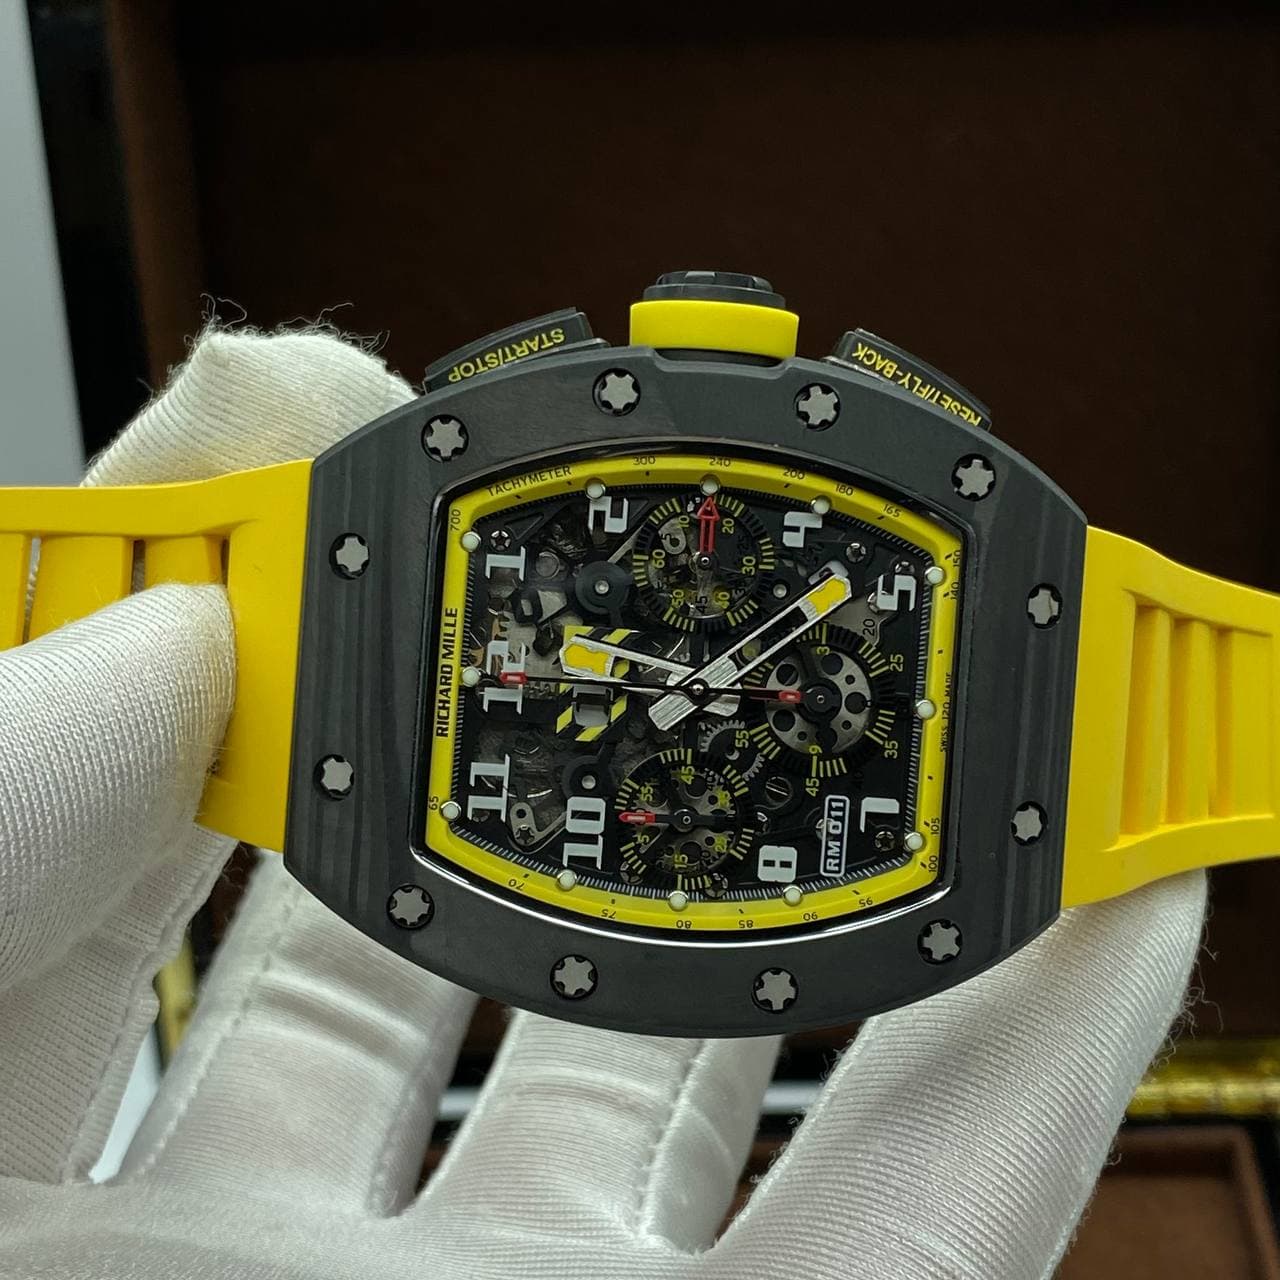 Richard Mille RM 011 Automatic Flyback Chronograph Carbon on Yellow Rubber Strap